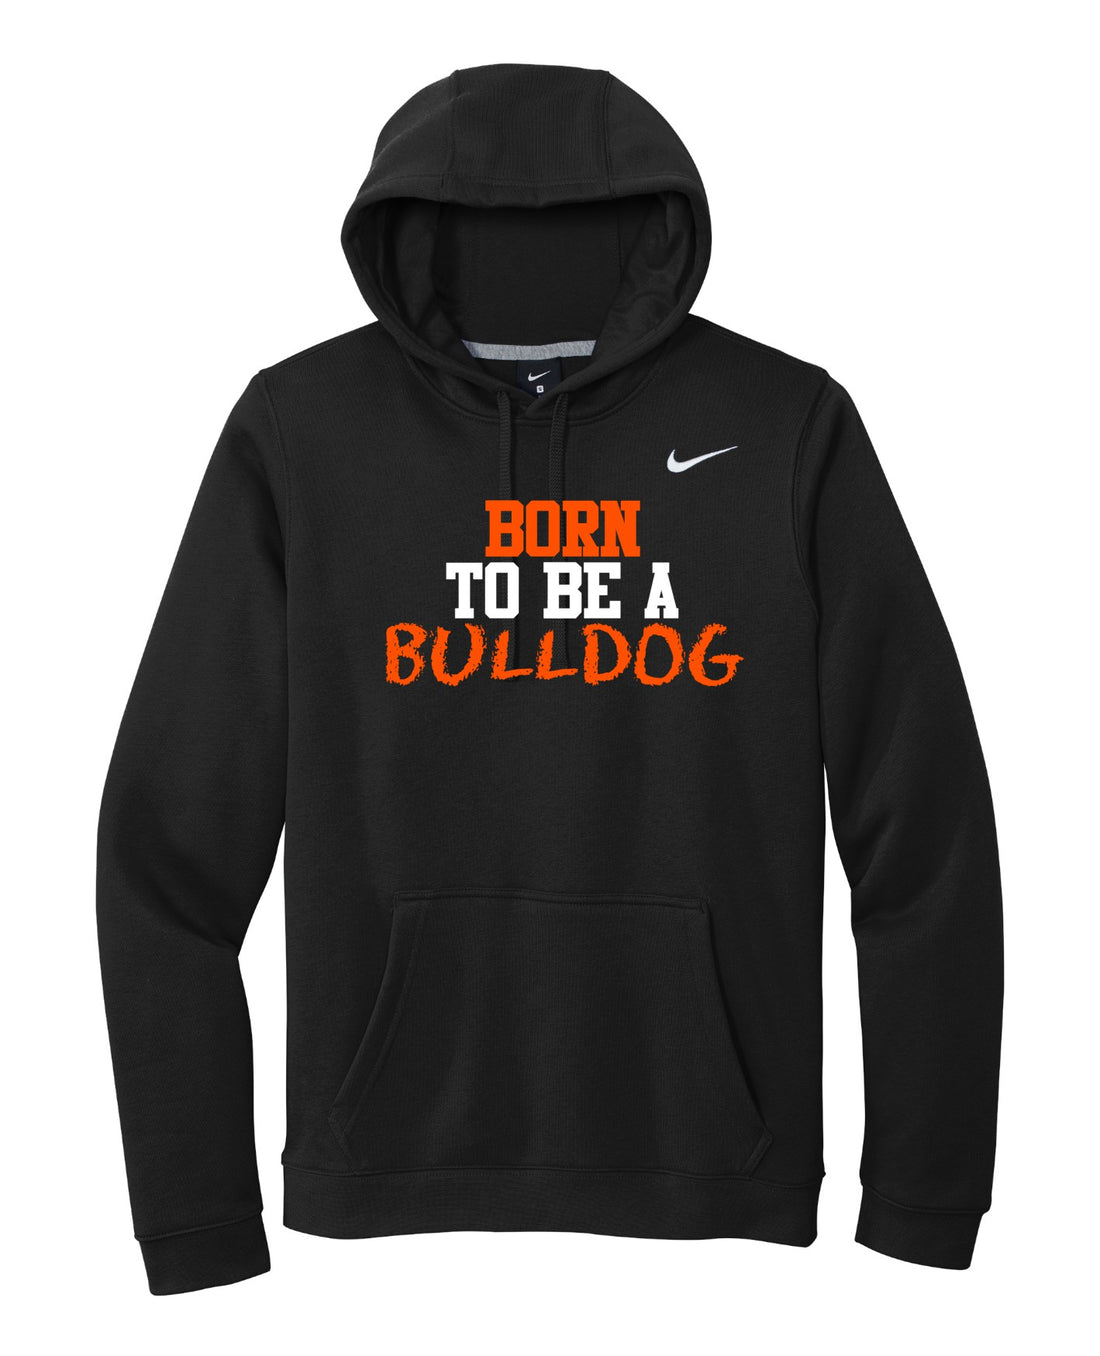 Born to Be A Bulldog Nike Hoodie - PRACTICE APPROVED